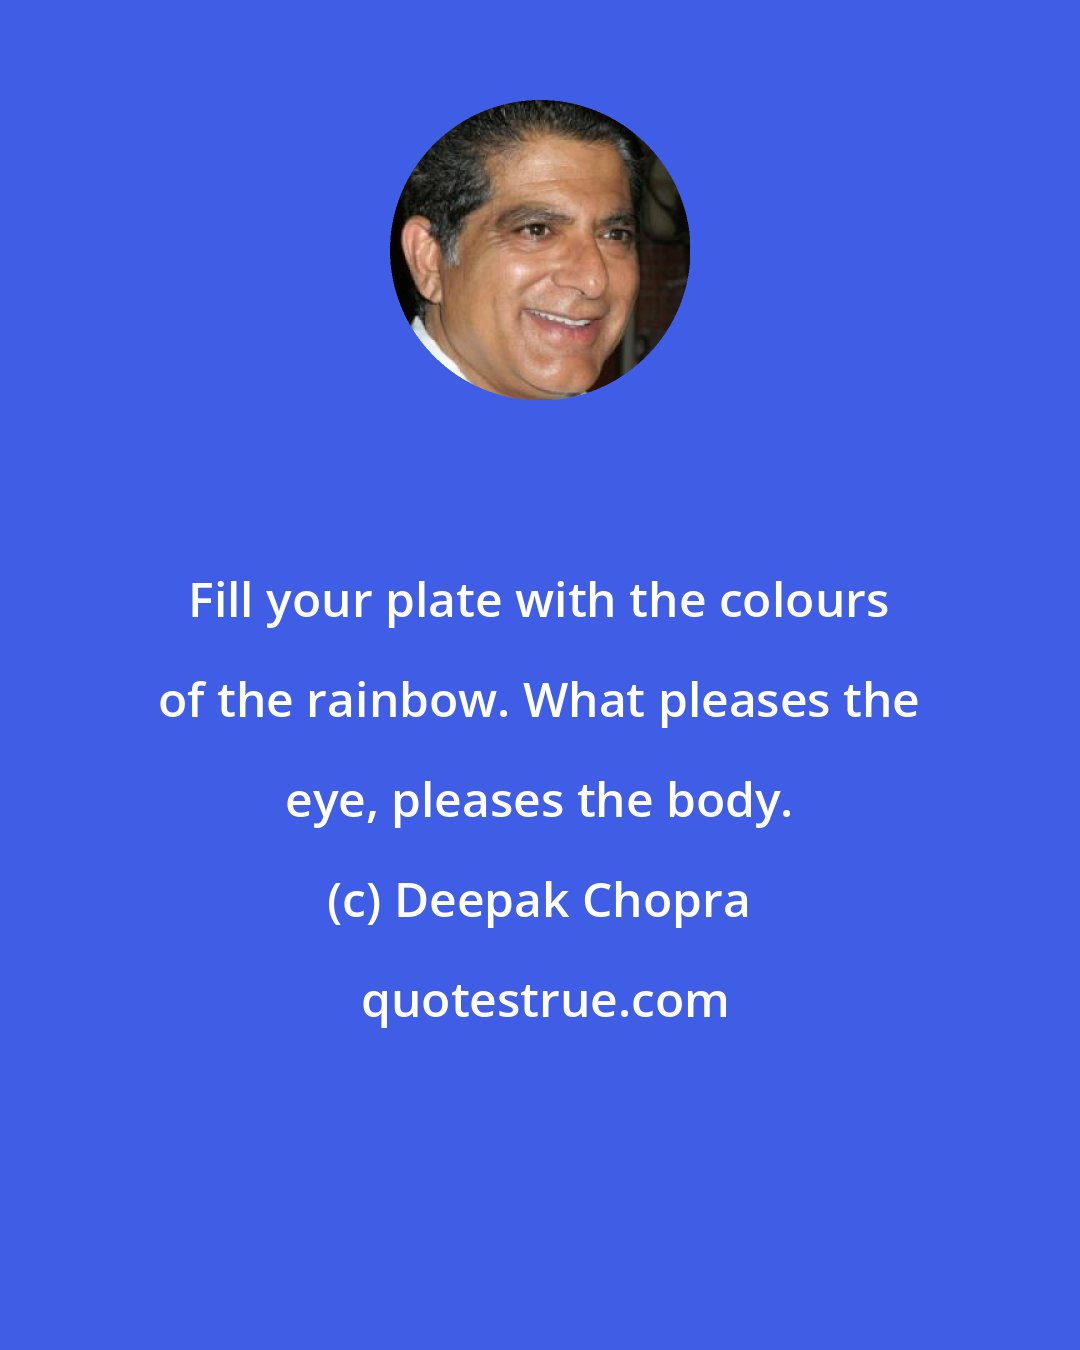 Deepak Chopra: Fill your plate with the colours of the rainbow. What pleases the eye, pleases the body.